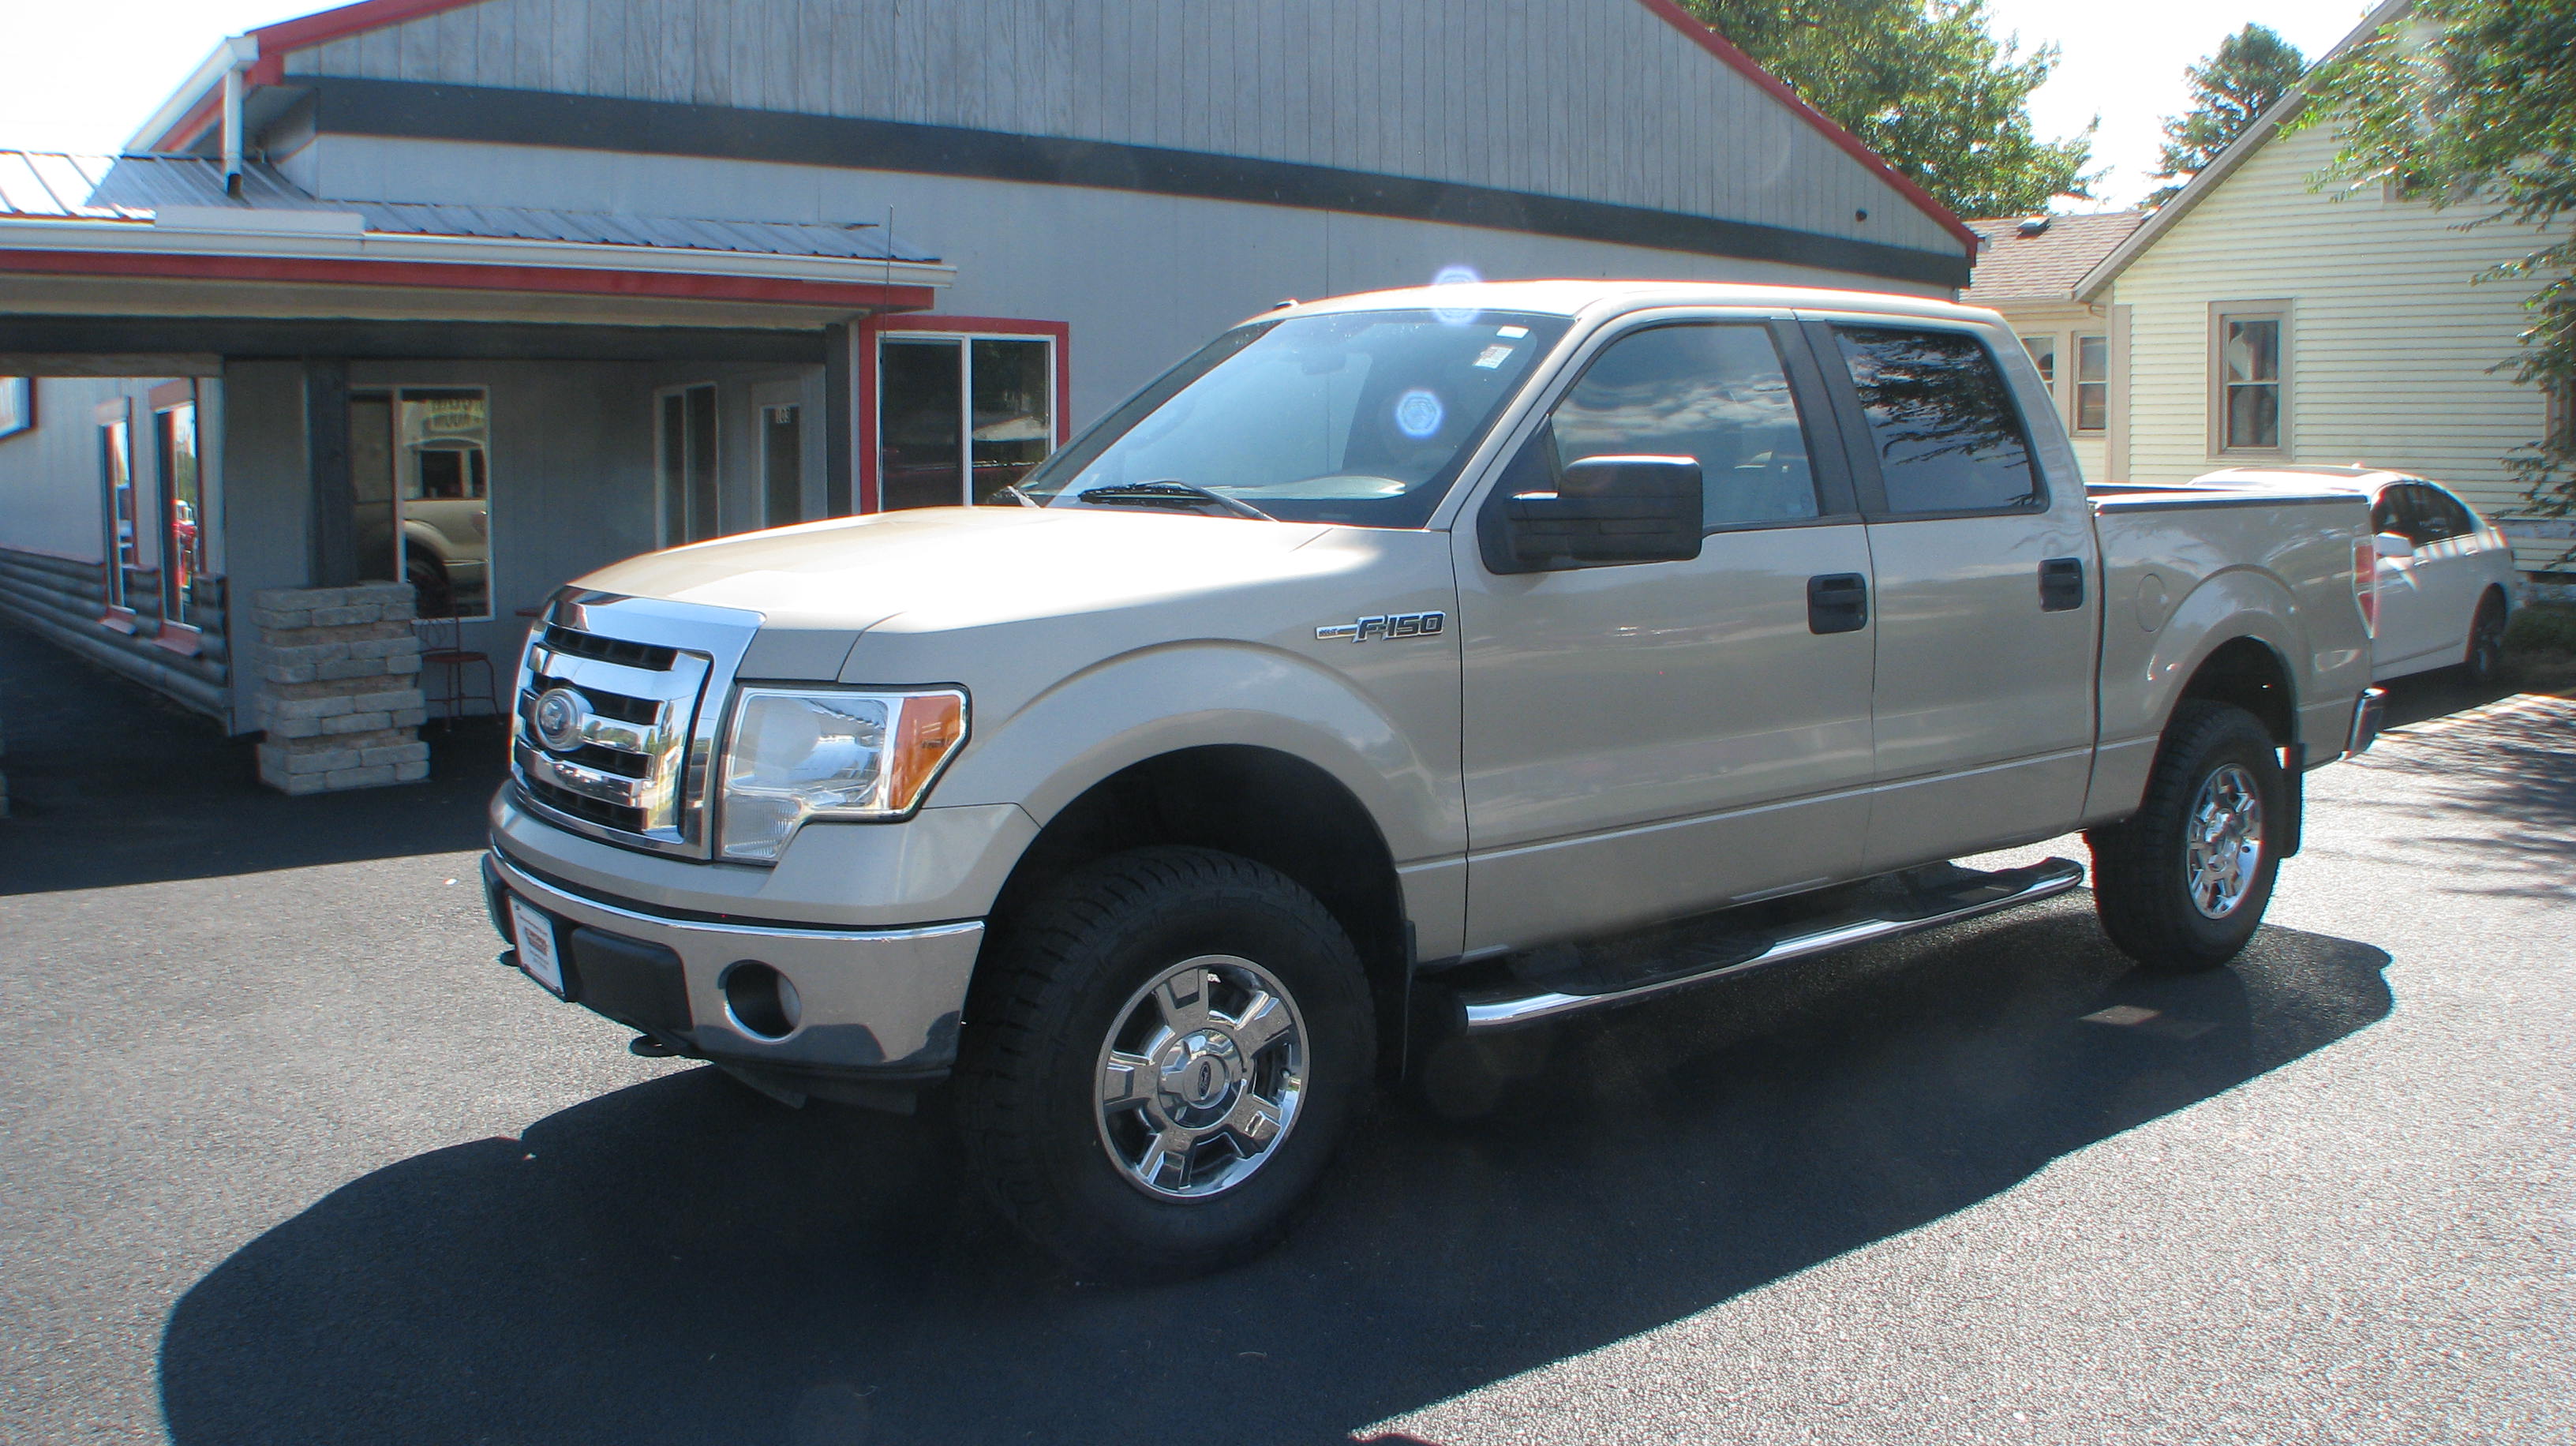 Pre-Owned 2010 Ford F150 4WD Supercrew XLT 5 1/2 in Coal Valley # 2010 Ford F150 5.4 L Towing Capacity